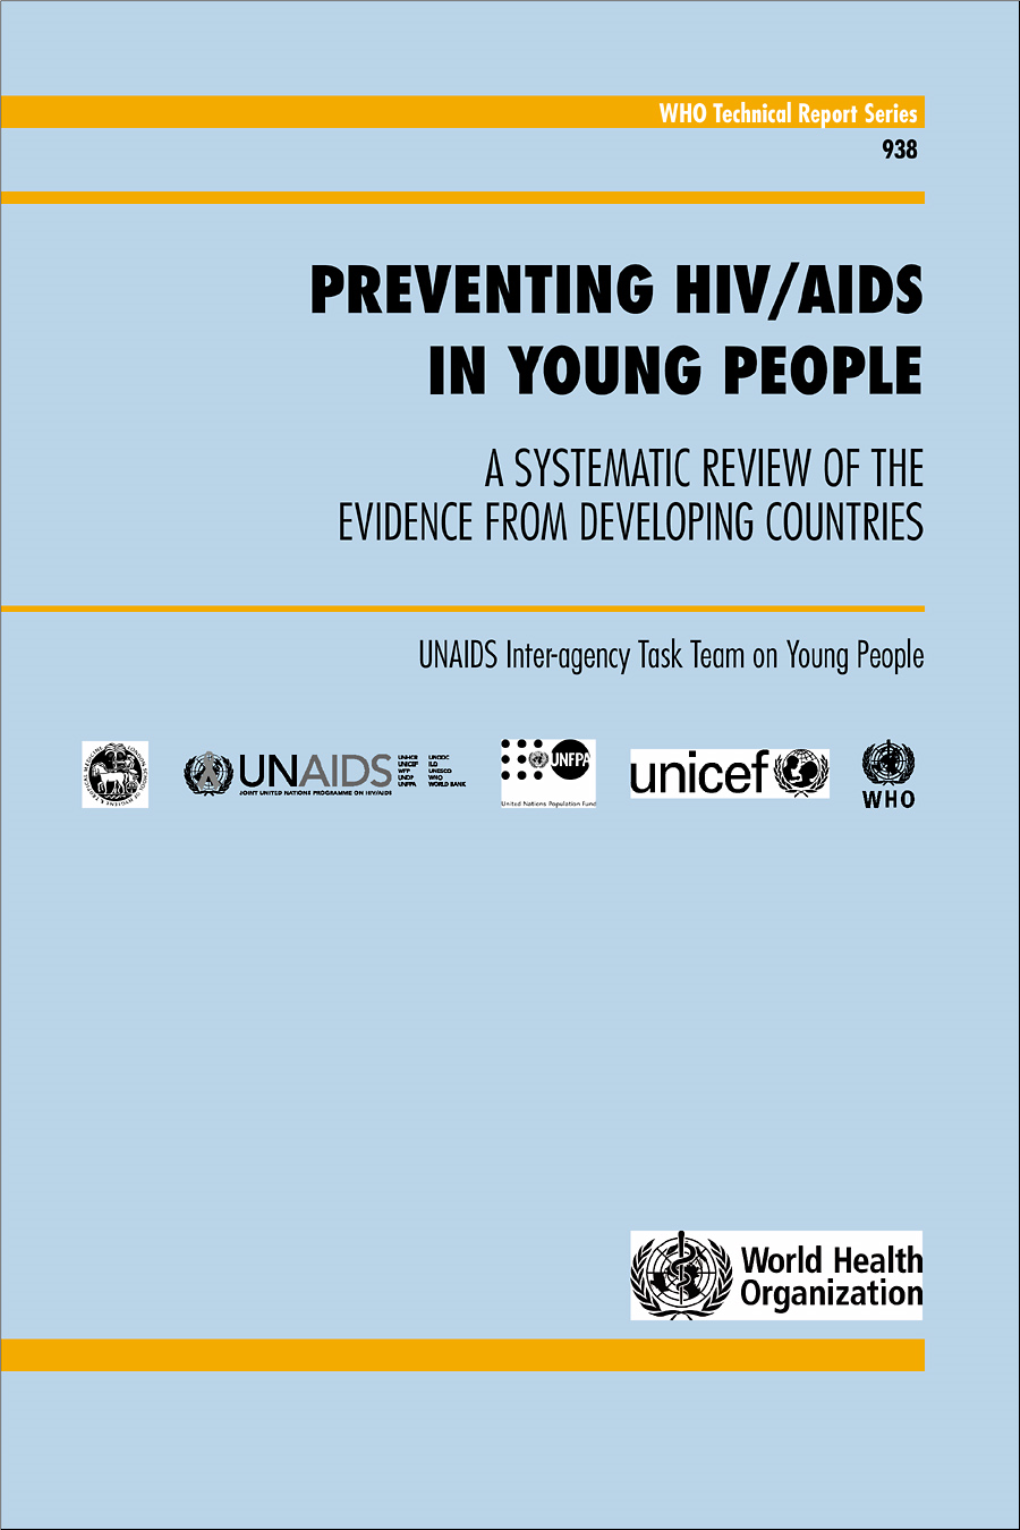 Preventing Hiv/Aids in Young People: A